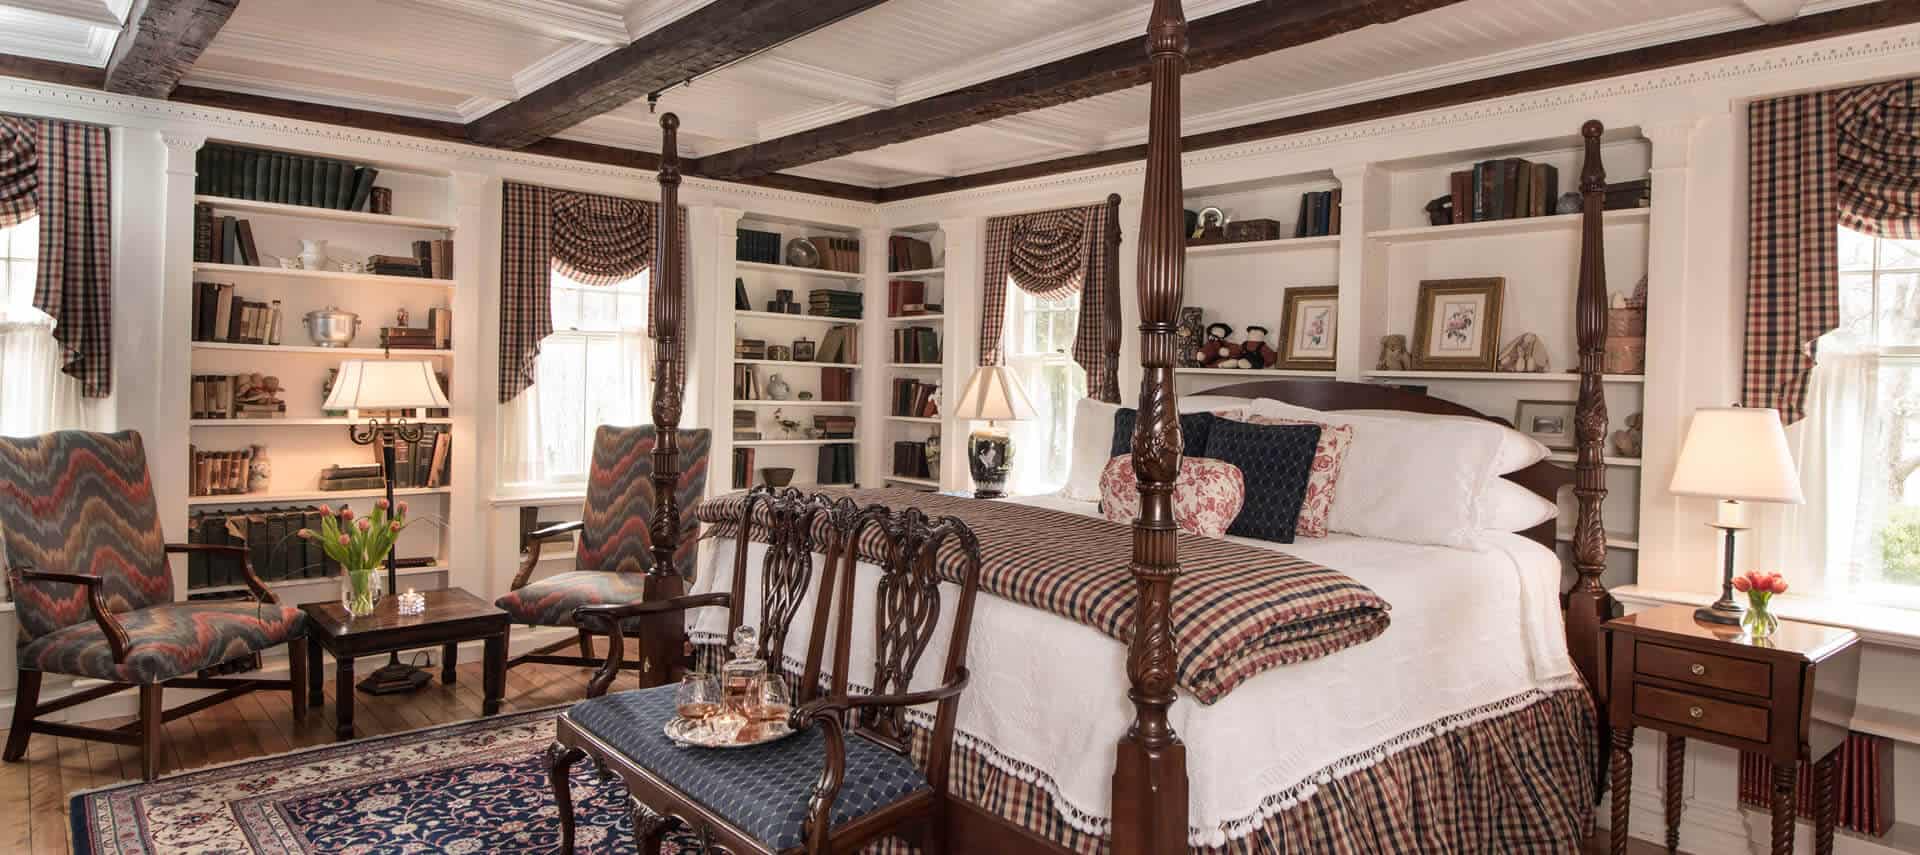 Inn at Ormsby Hill - Library Room with Four Poster Bed